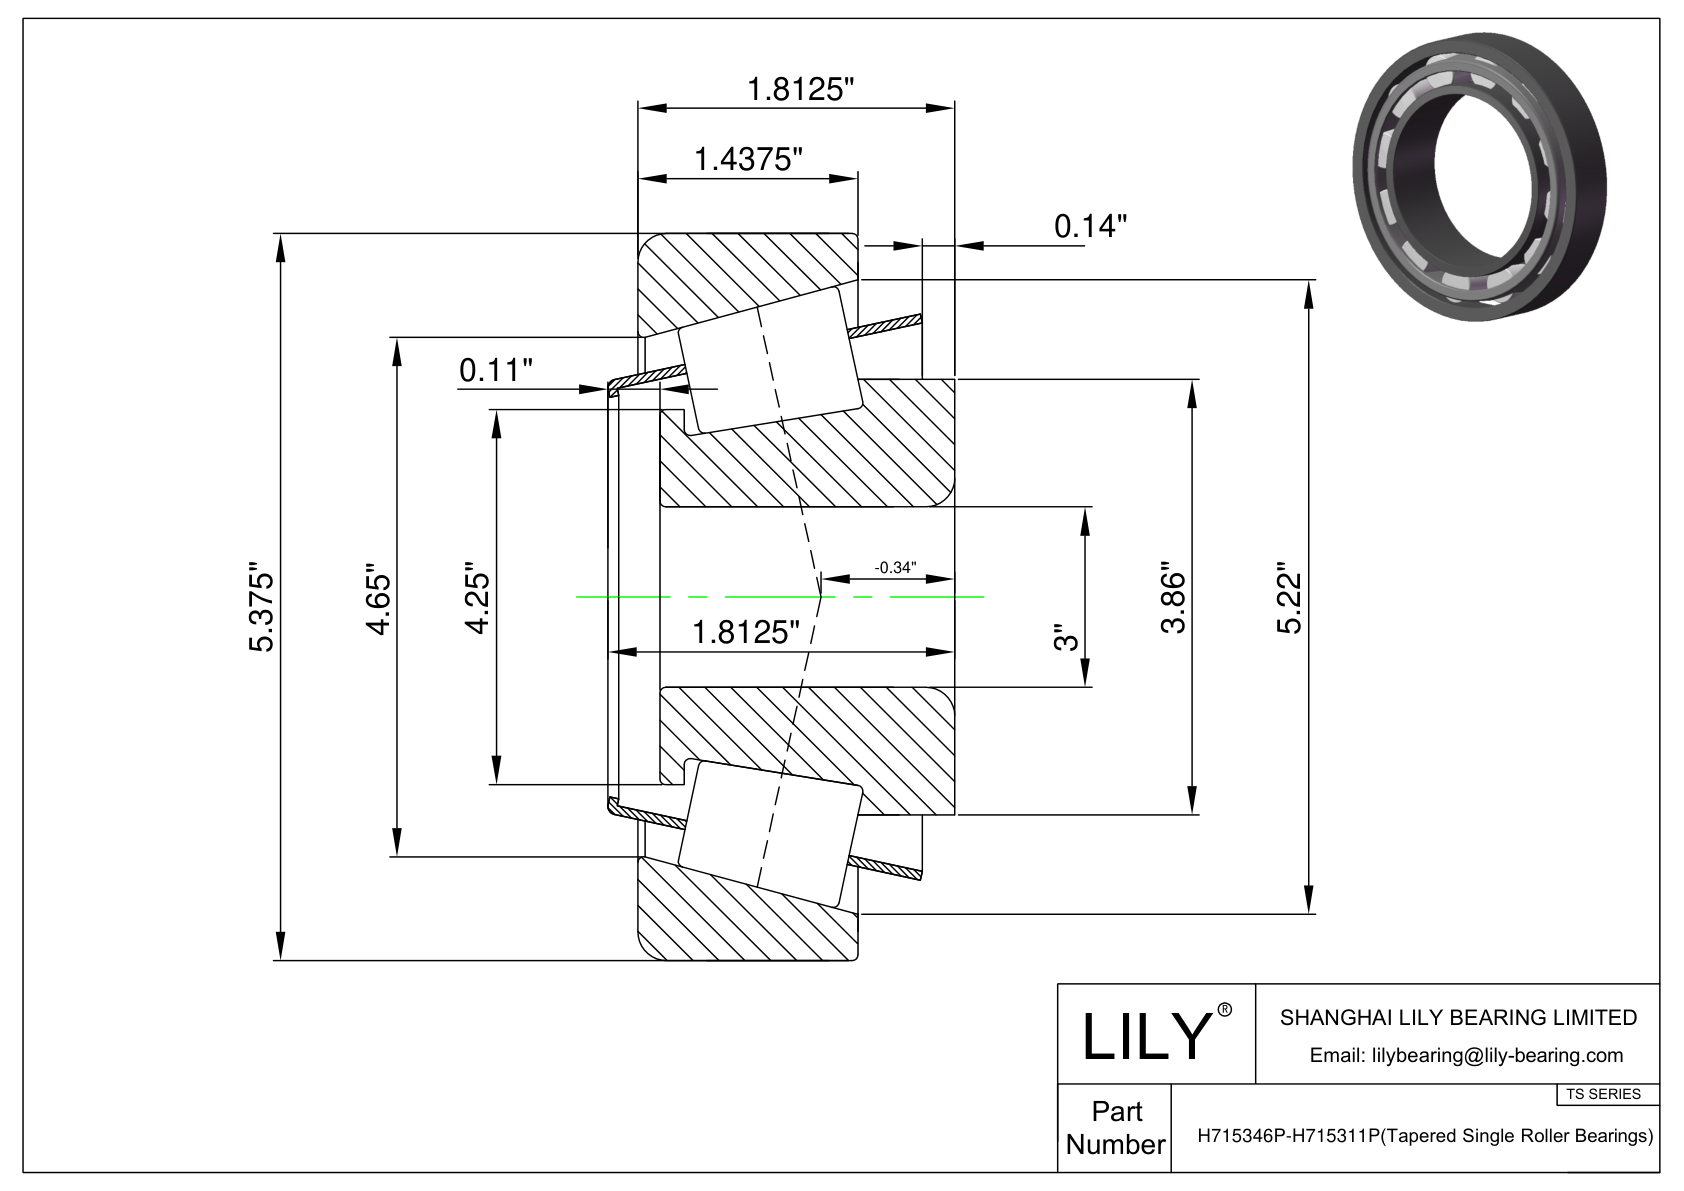 H715346P-H715311P TS (Tapered Single Roller Bearings) (Imperial) cad drawing